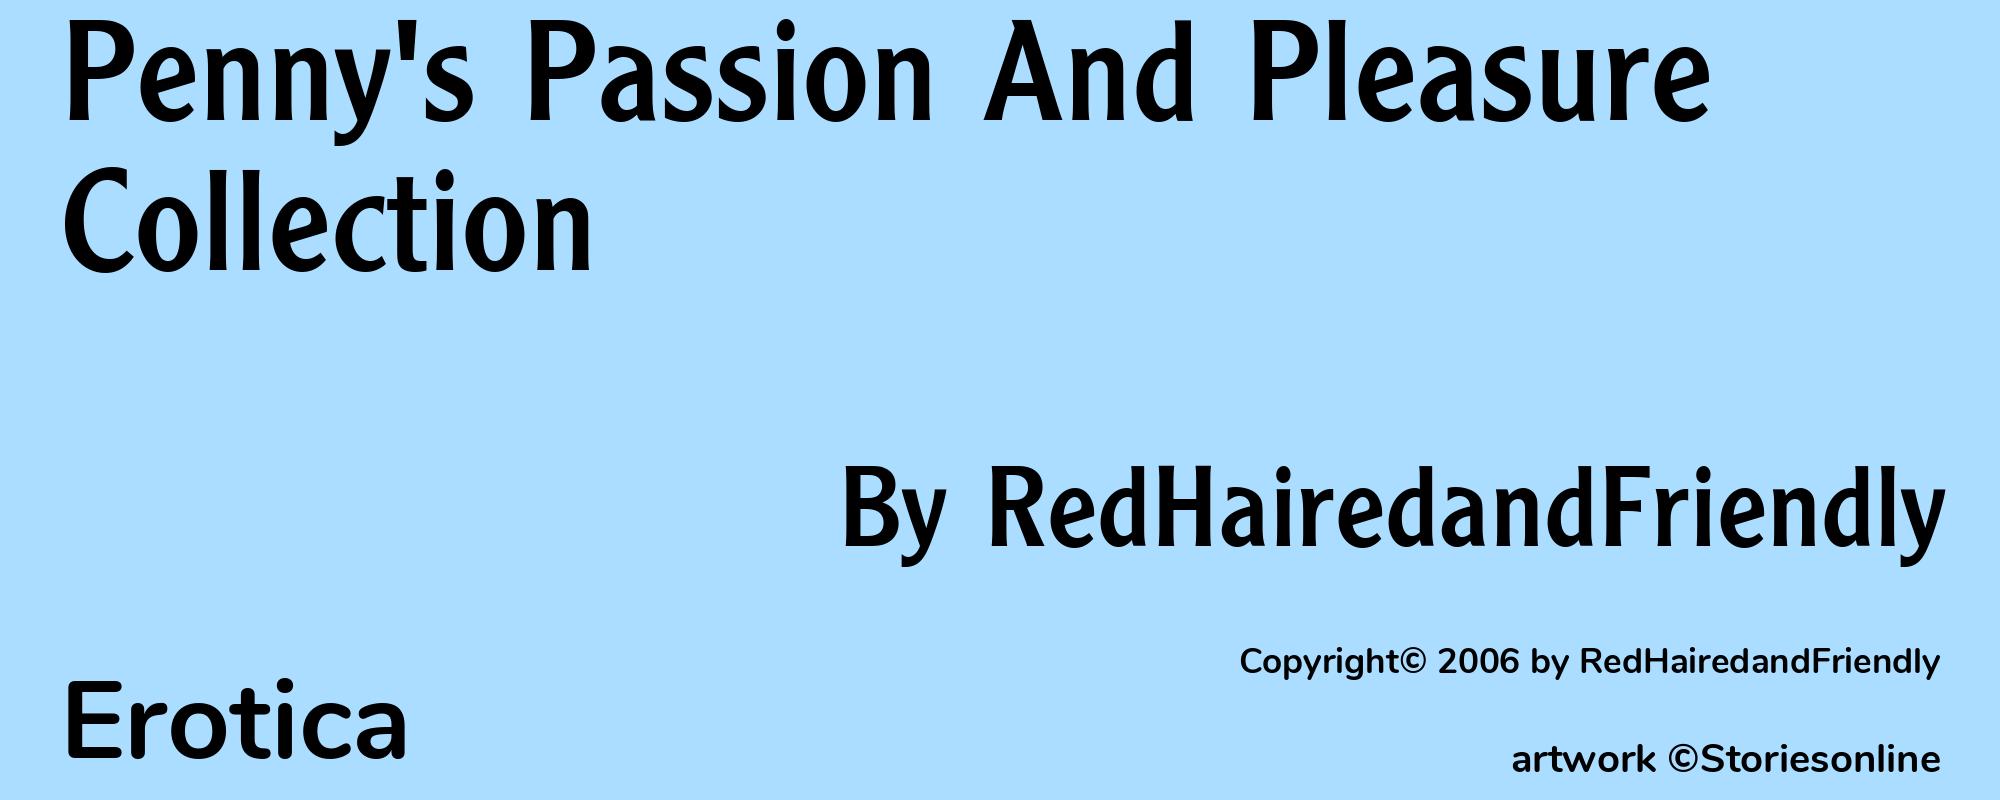 Penny's Passion And Pleasure Collection - Cover